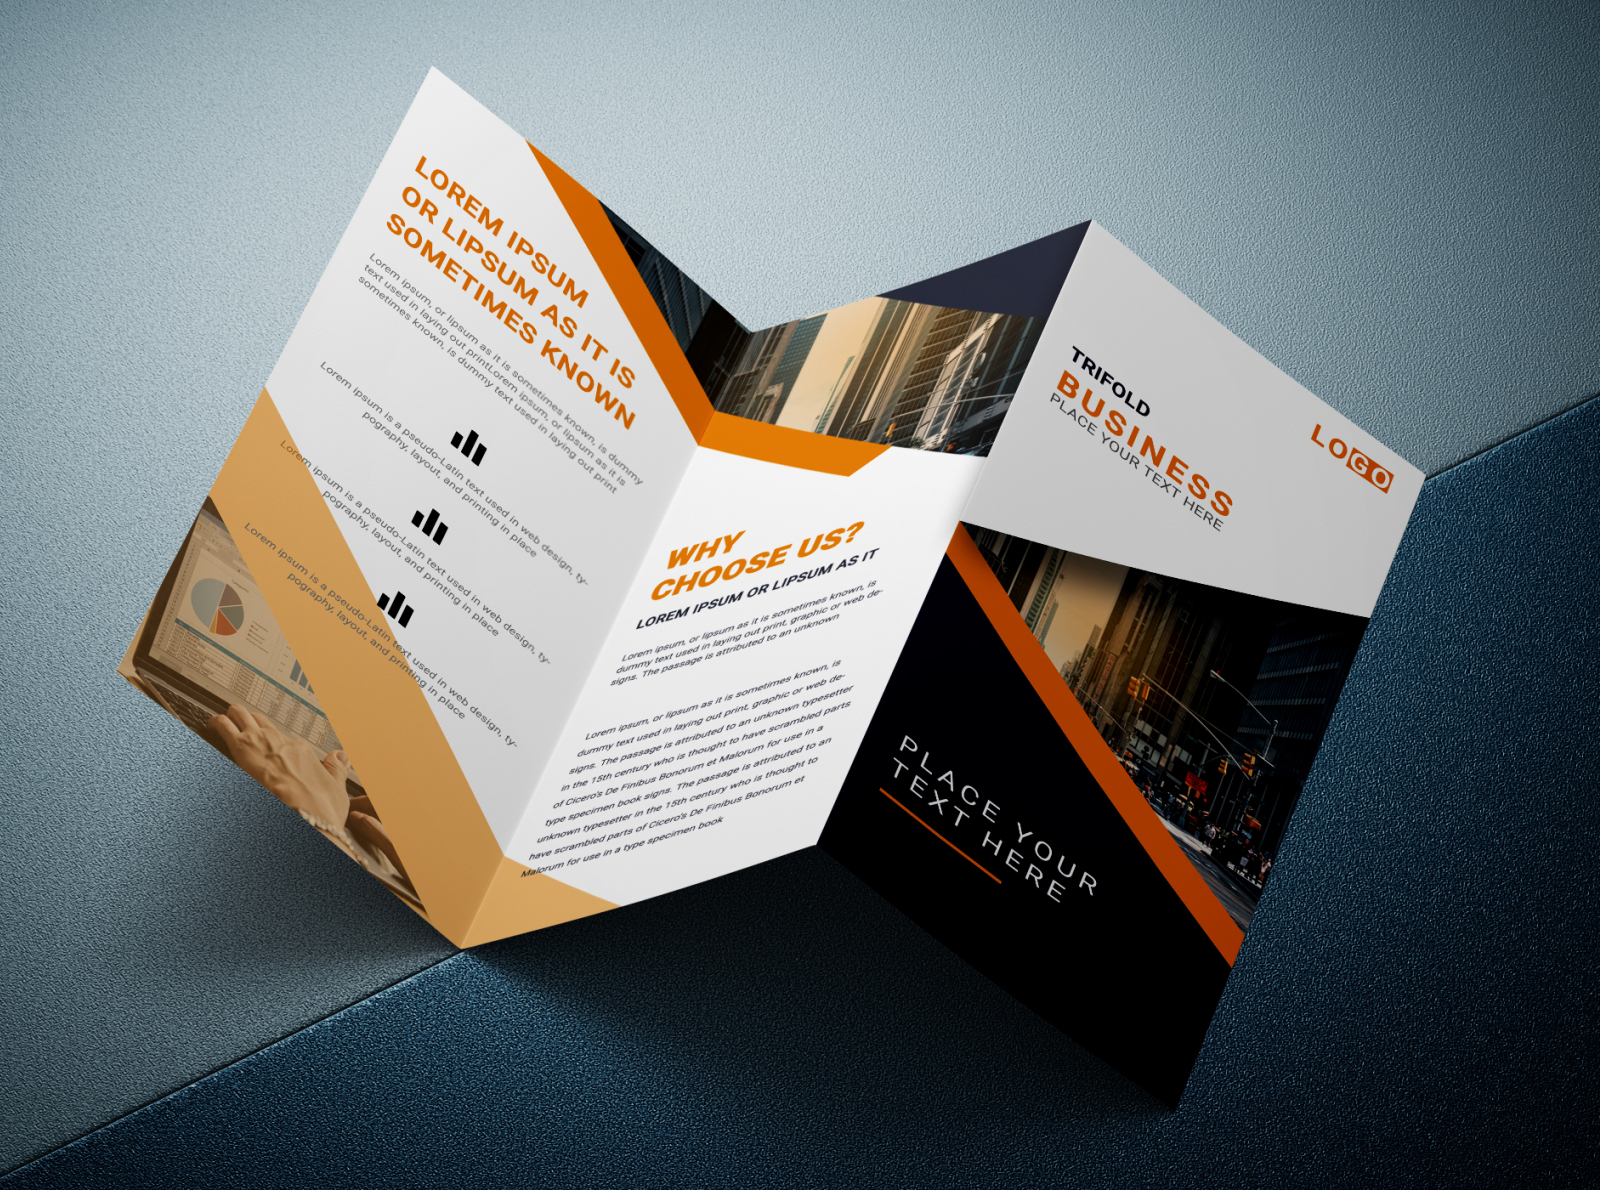 DE Trifold Leaflet Mockup by RK Zahid Hassan Dipu on Dribbble